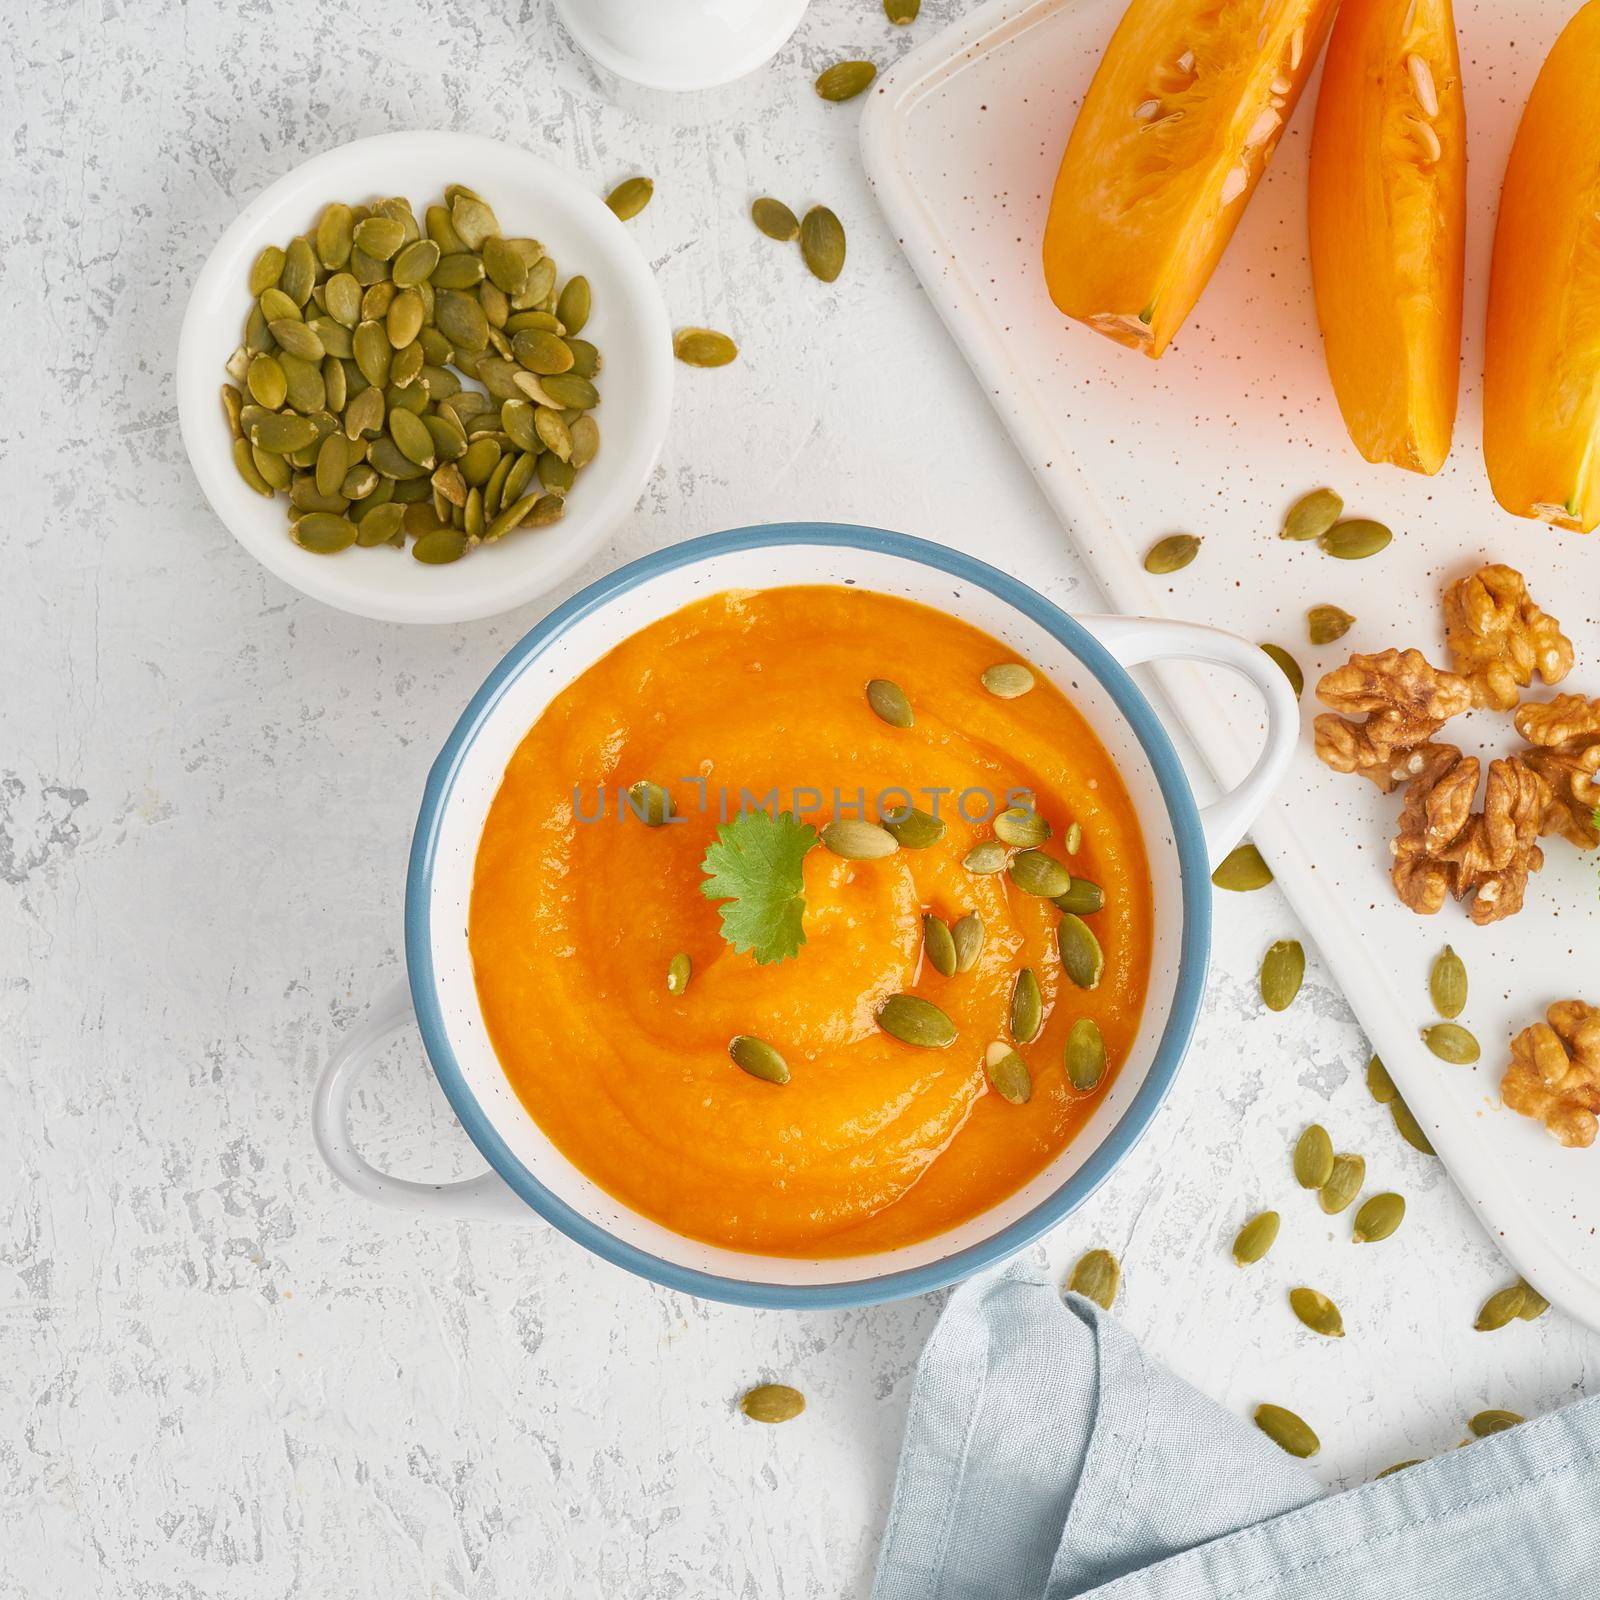 healthy food for vegans, cream soup with walnuts and pumpkin seeds